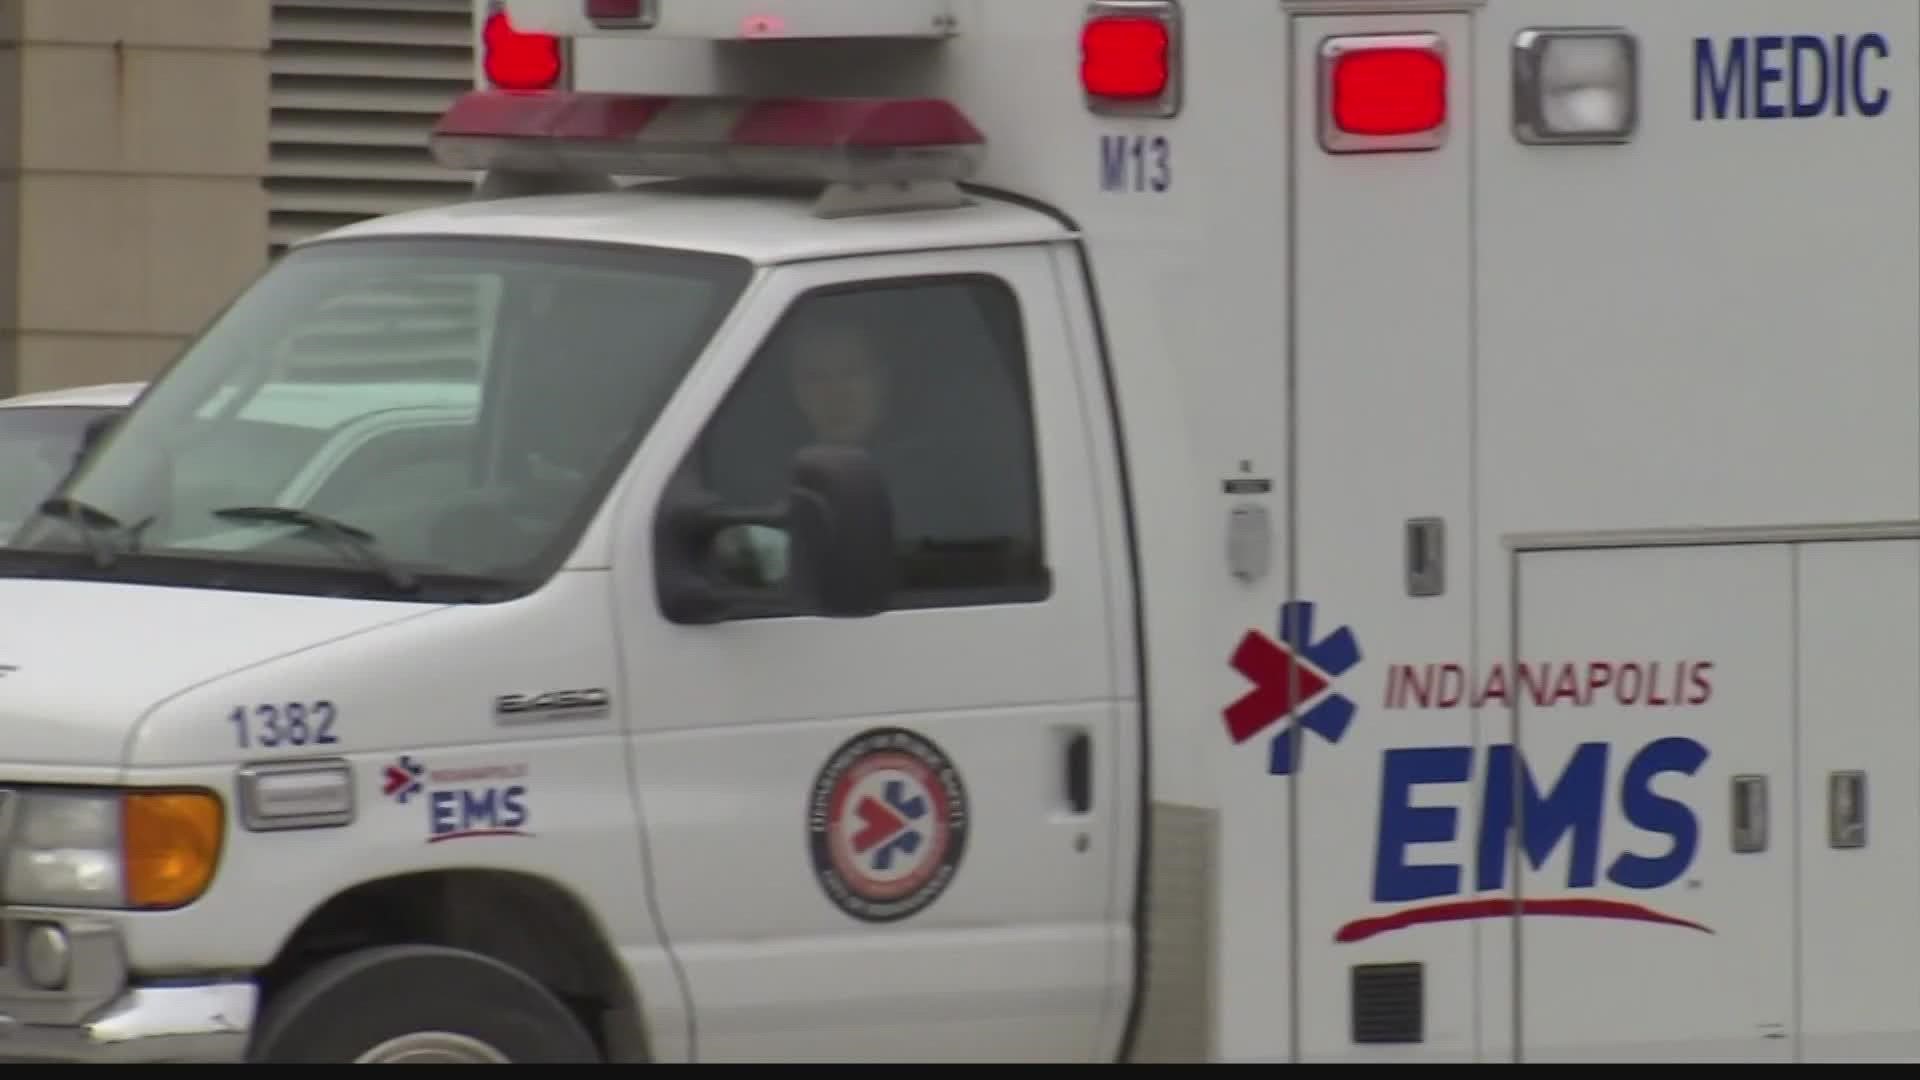 We're learning more about changes to the city's EMS services. It comes after a staff shortage and increased calls.